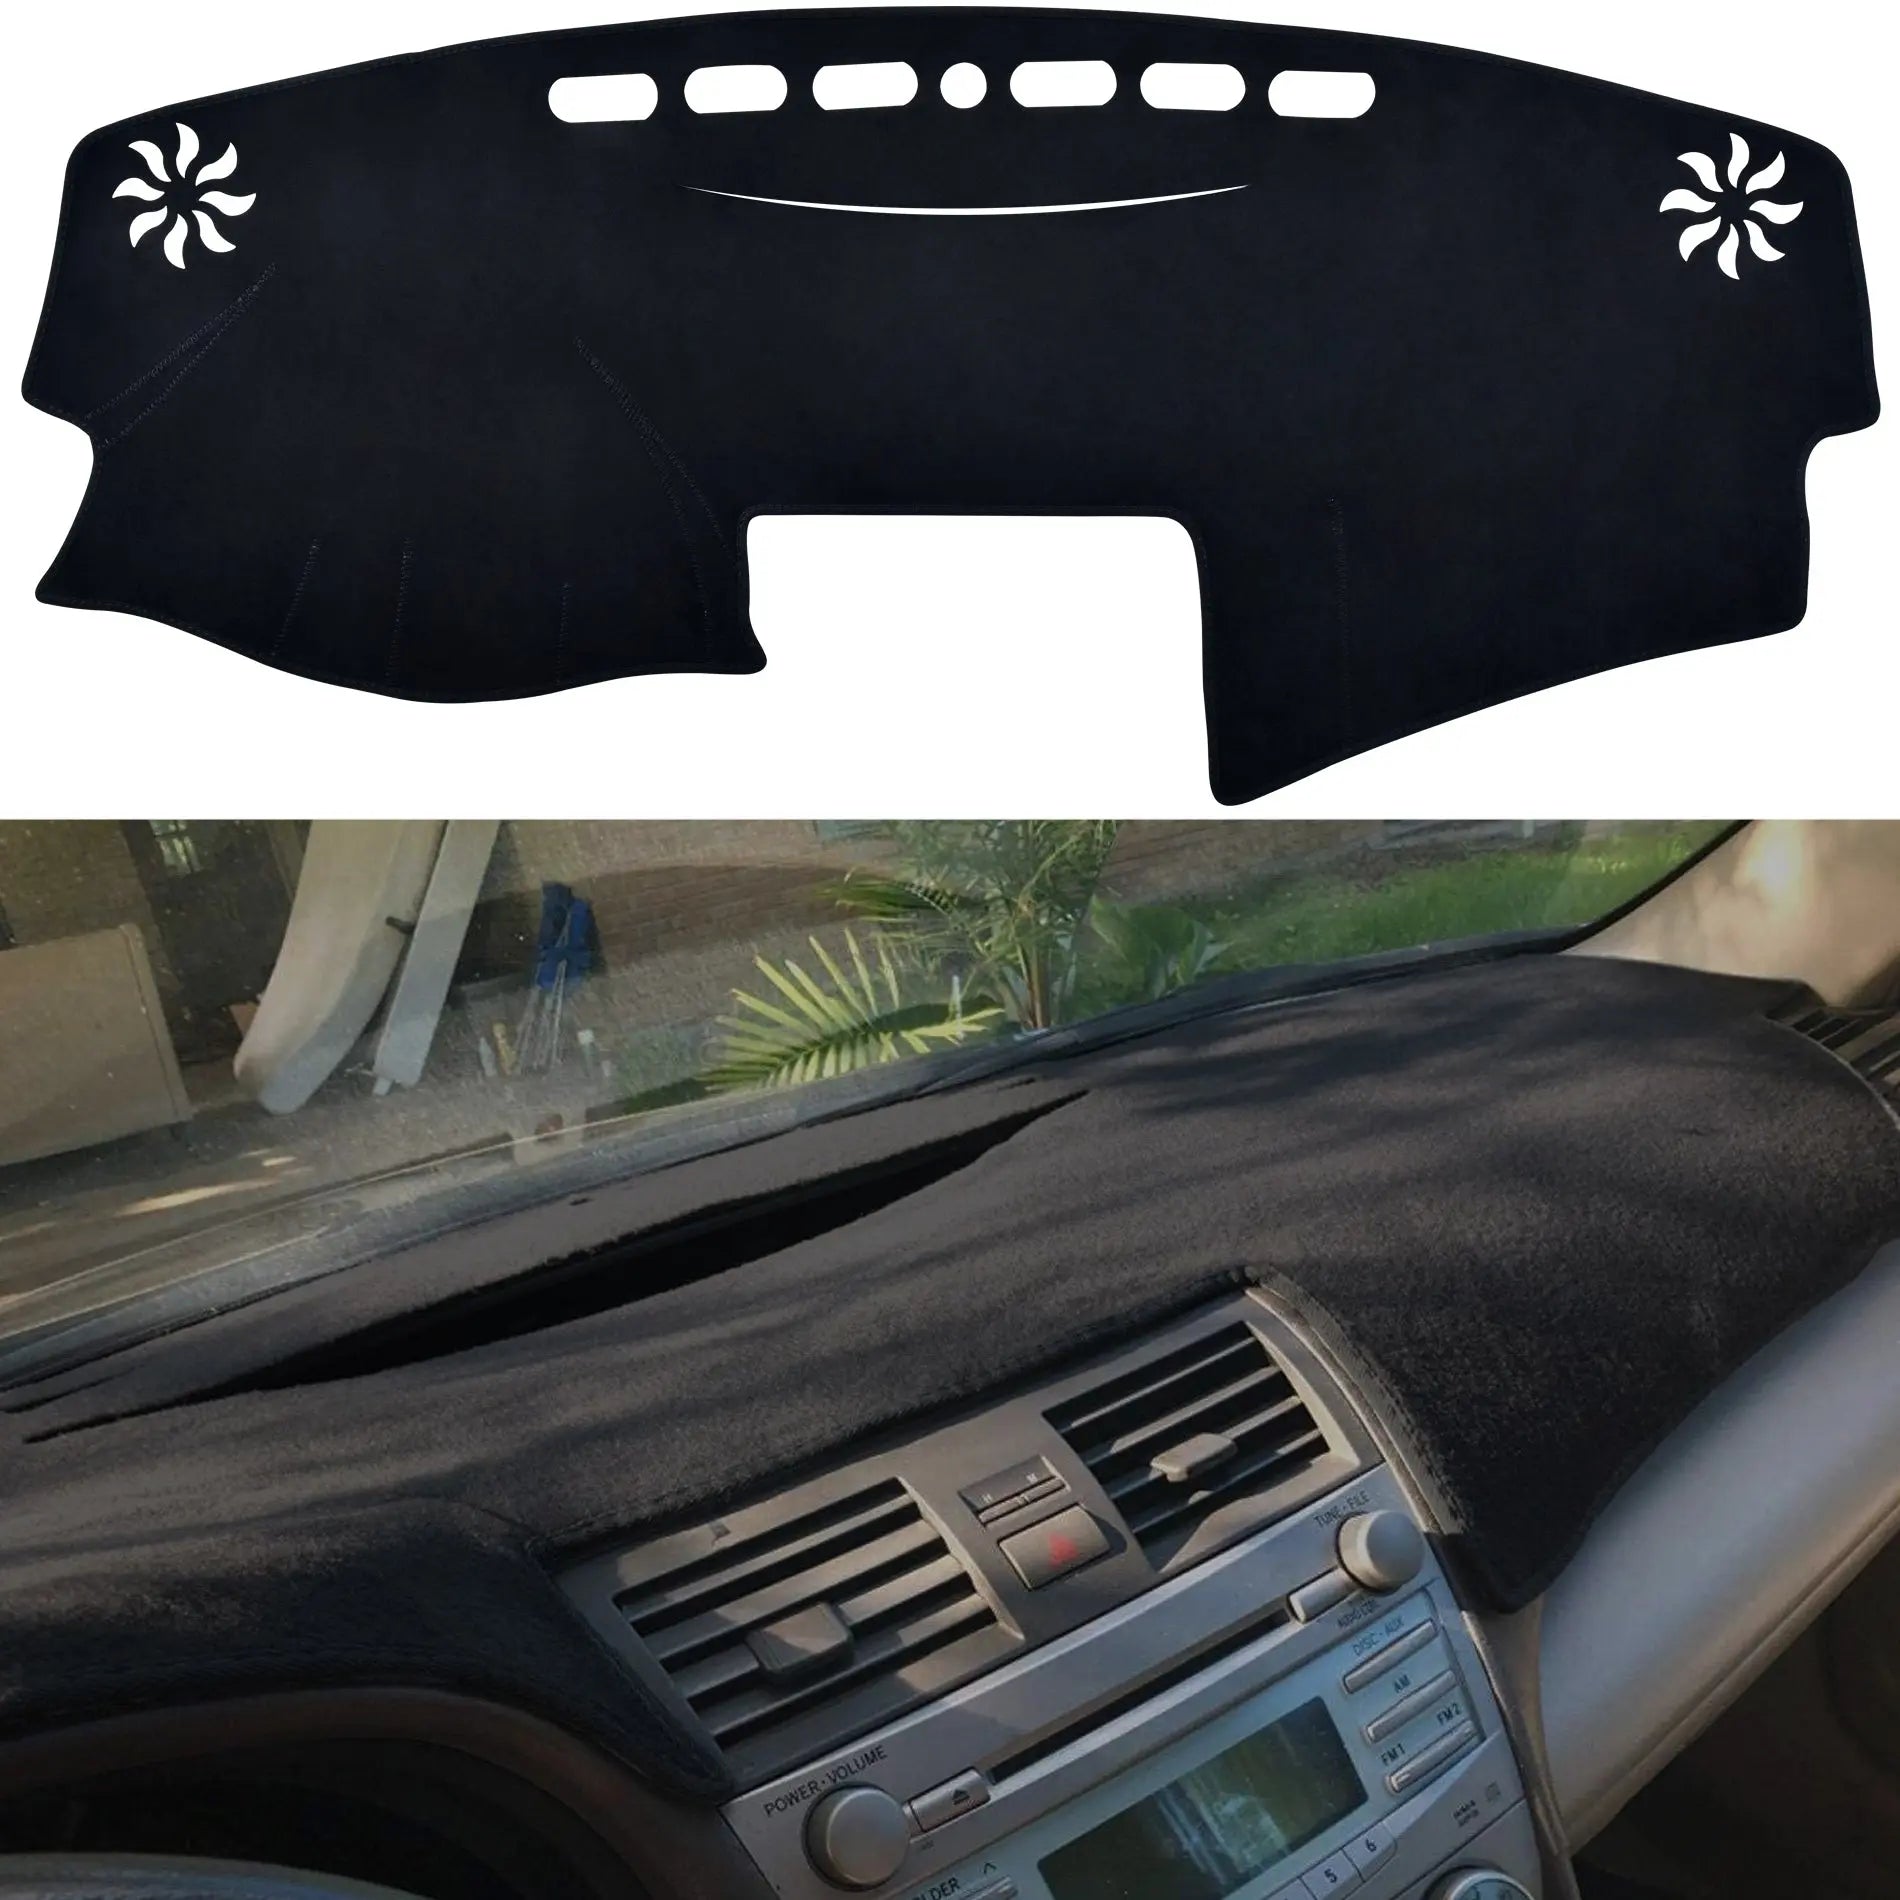 HanLanKa Dashboard Cover for GMC Sierra and Chevrolet Silverado- Fits 2007-2013 Models with Two Glove Boxes. Custom Fit Dash Mat, Won't Break Dash